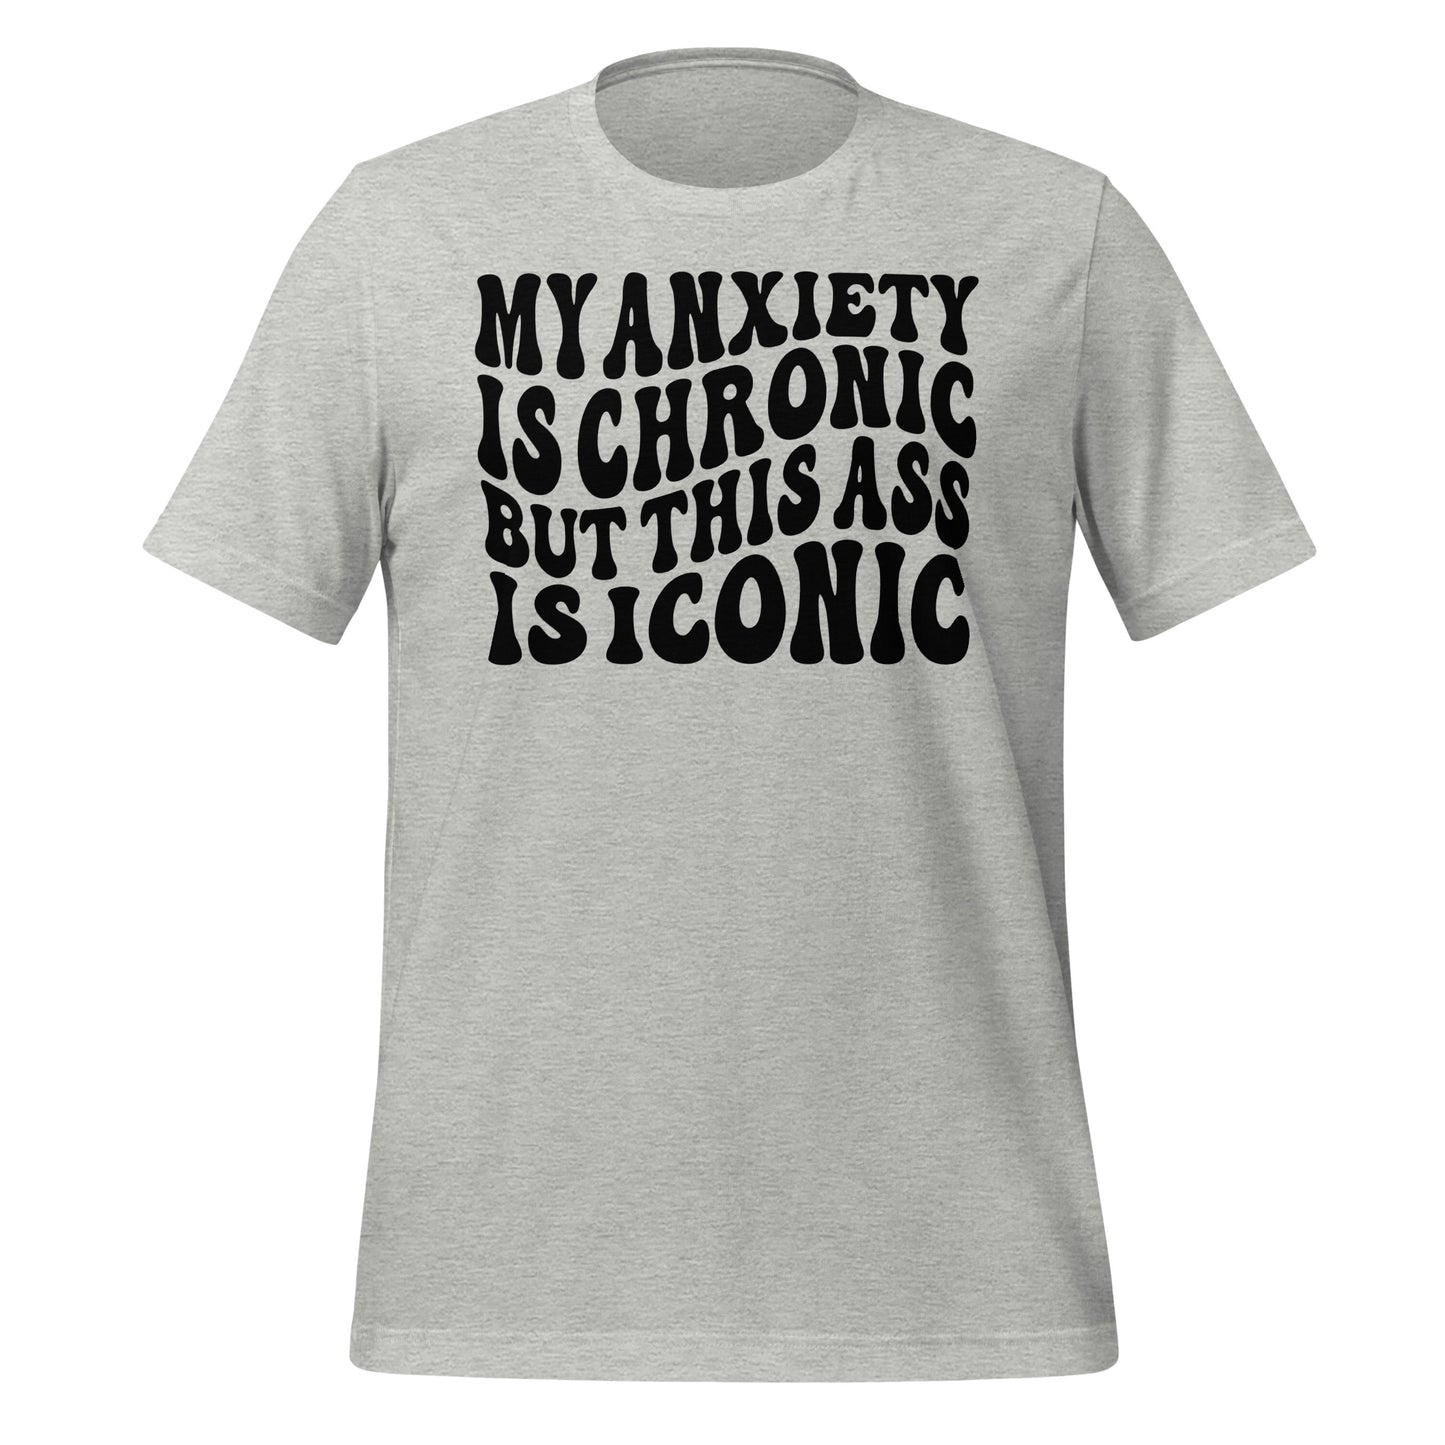 My Anxiety is Chronic but This Ass is Iconic Quality Cotton Bella Canvas Adult T-Shirt